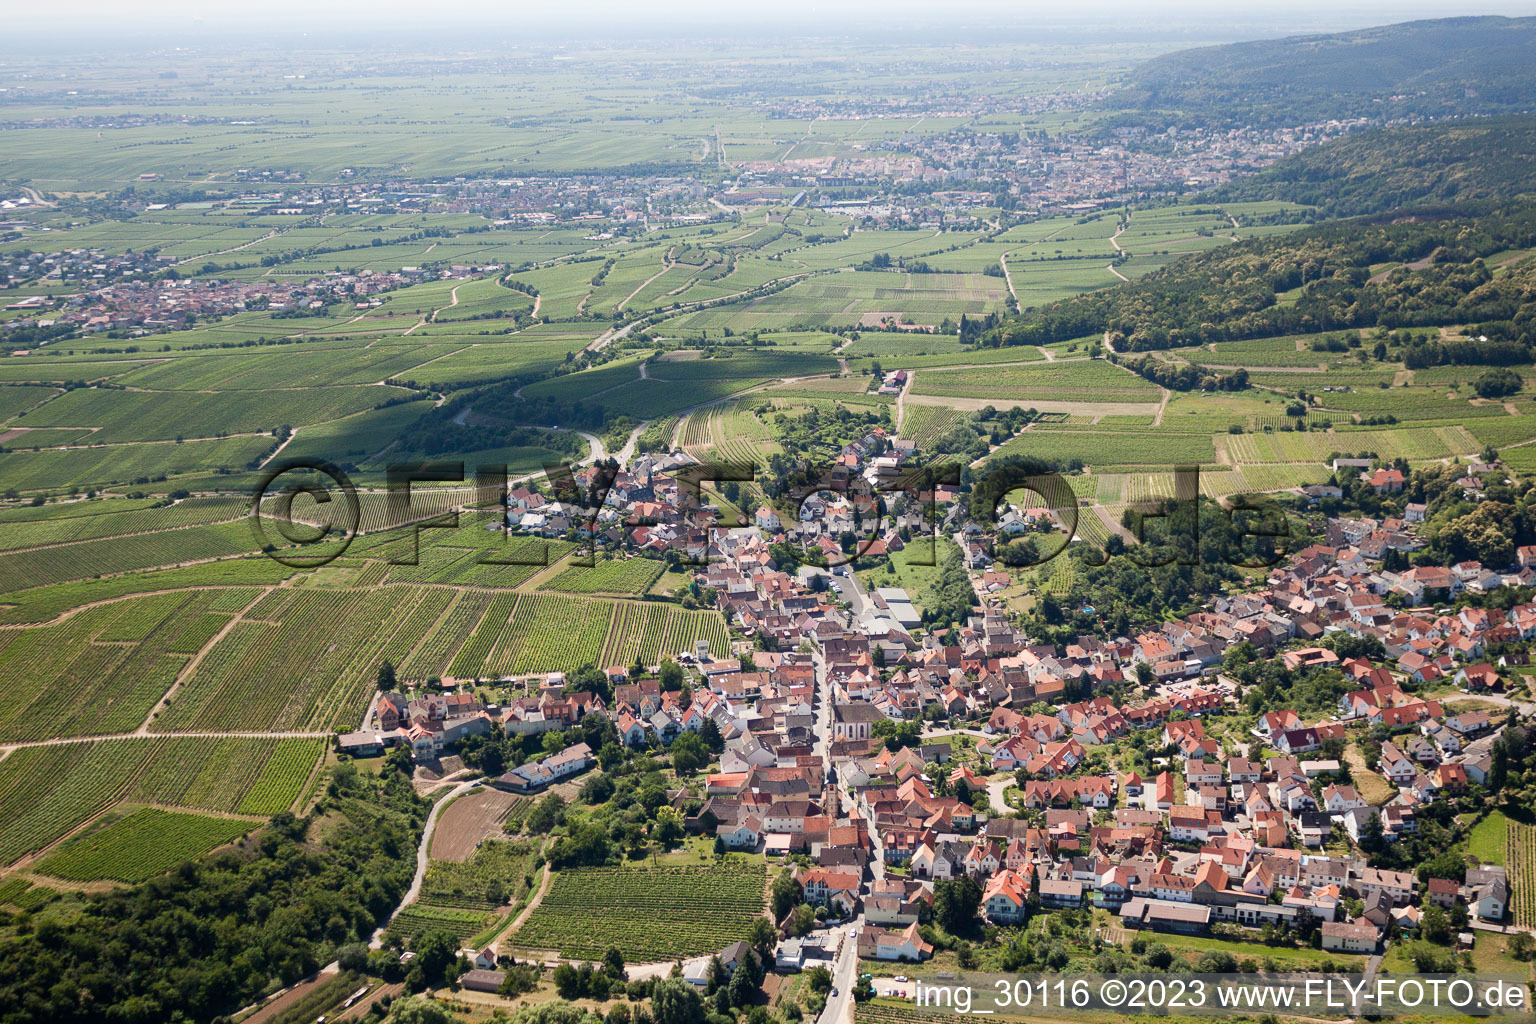 Village - view on the edge of agricultural fields and farmland in Leistadt in the state Rhineland-Palatinate, Germany